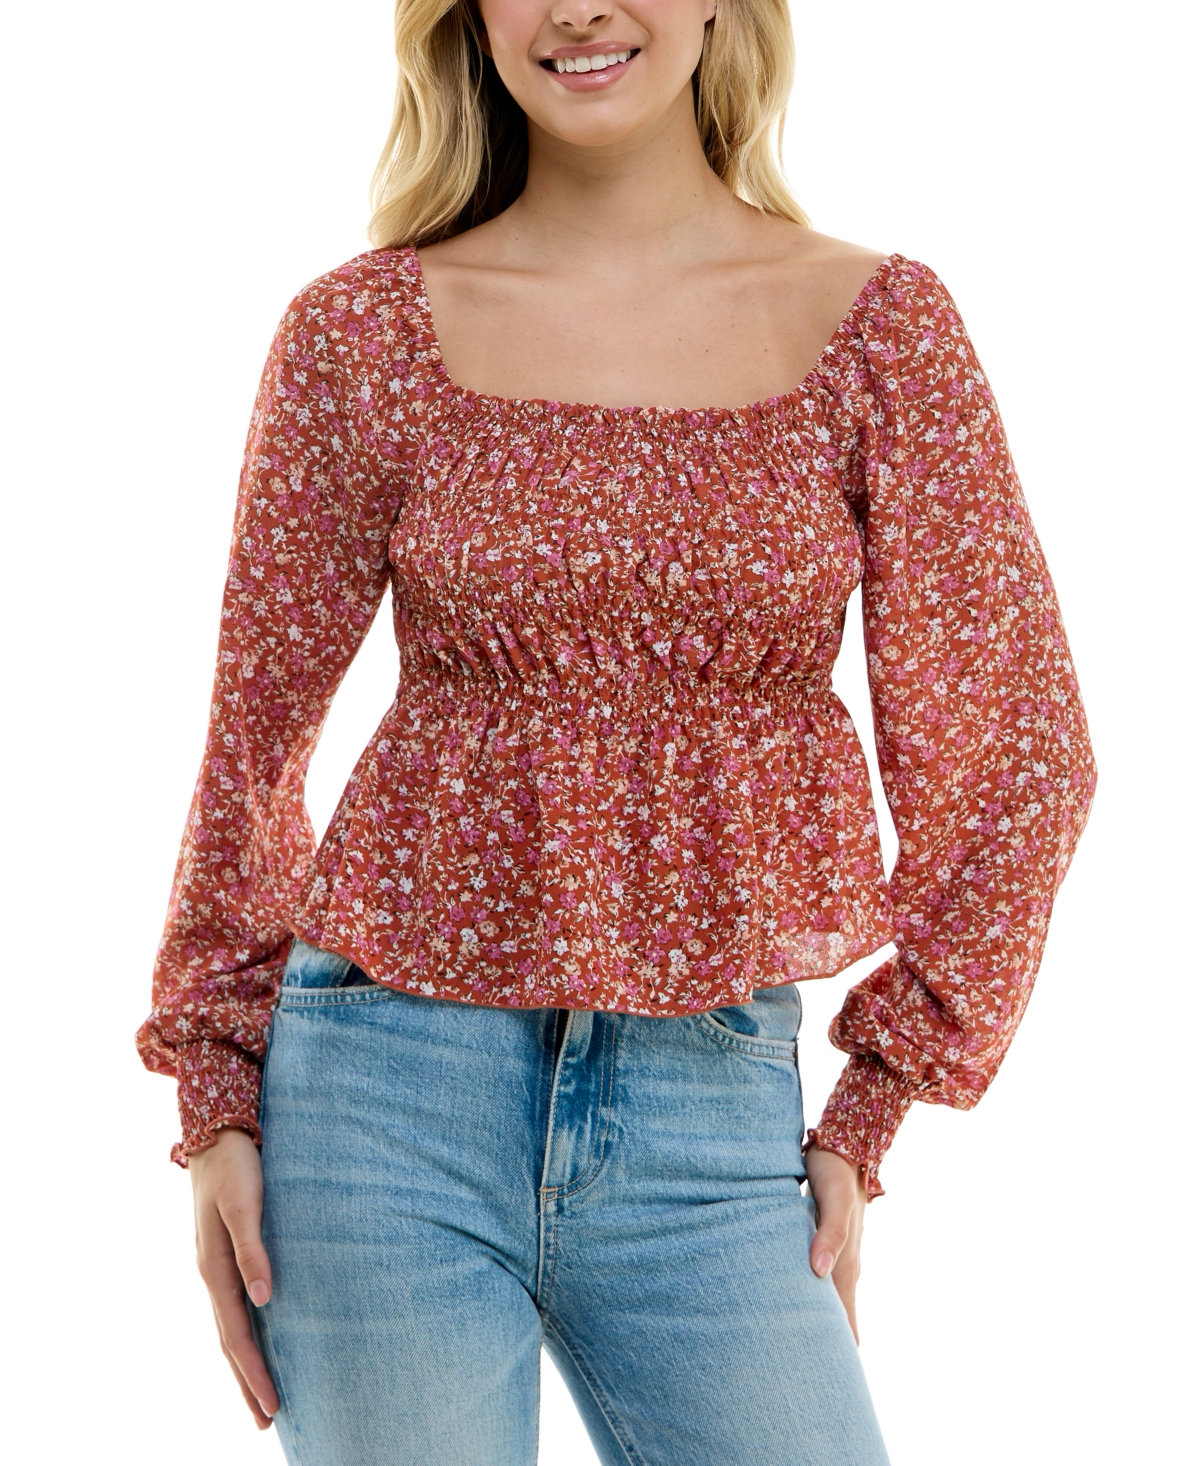 JUNIORS' SMOCKED PEPLUM TOP IN BAKED CLAY Boho-inspiration abounds in this juniors' peplum top from Ultra Flirt. Looks fab with jeans and sandals. Juniors Juniors' Clothing - Tops